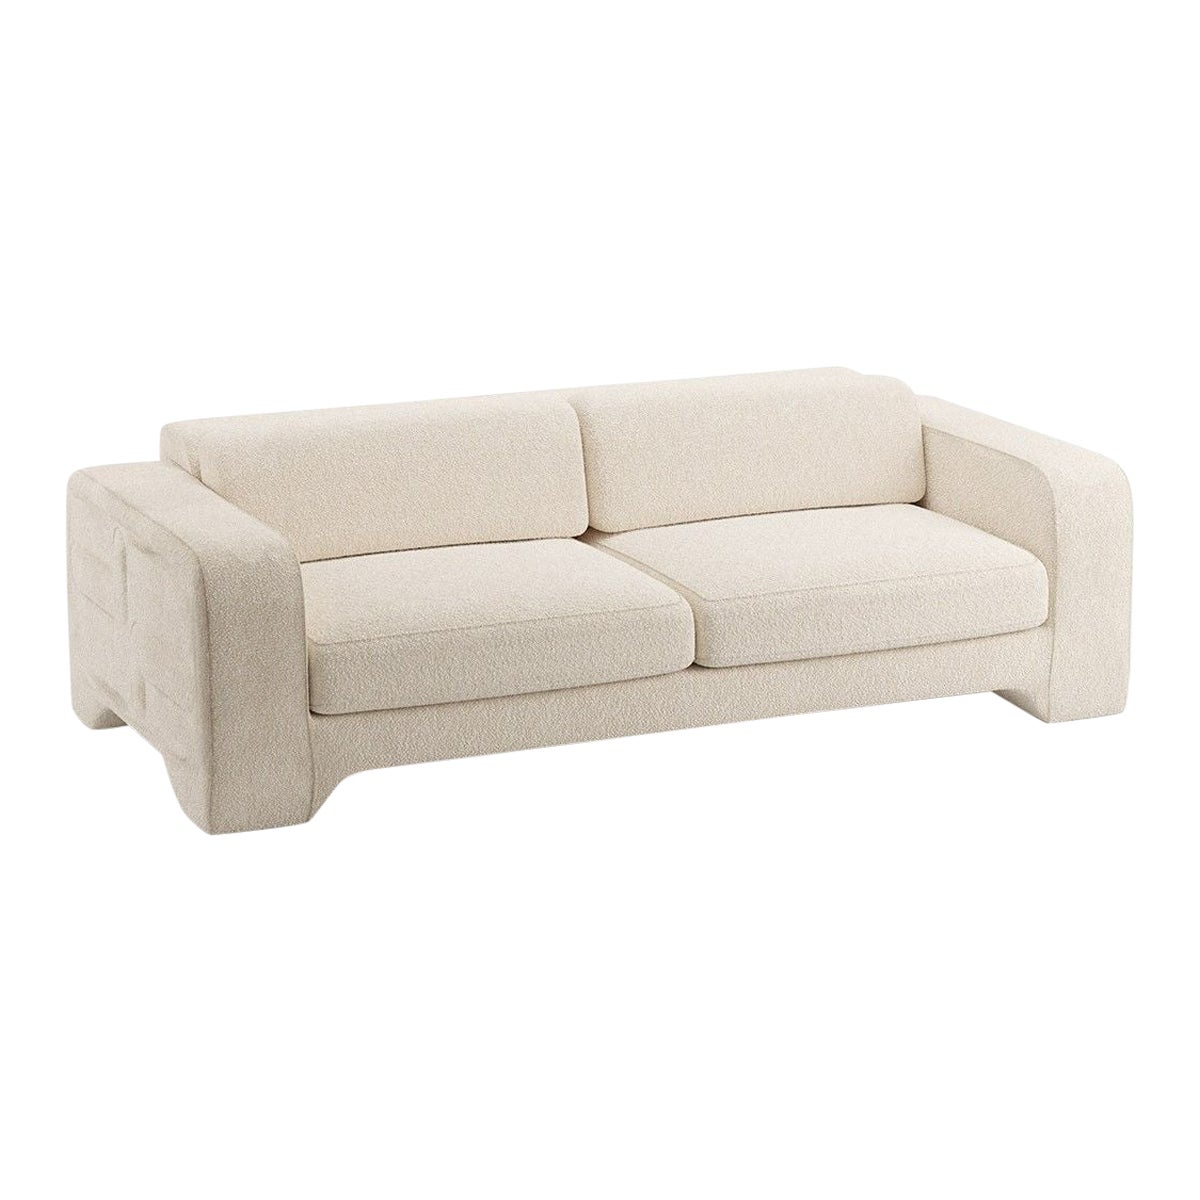 Popus Editions Giovanna 4 Seater Sofa in Natural Athena Loop Yarn Upholstery For Sale